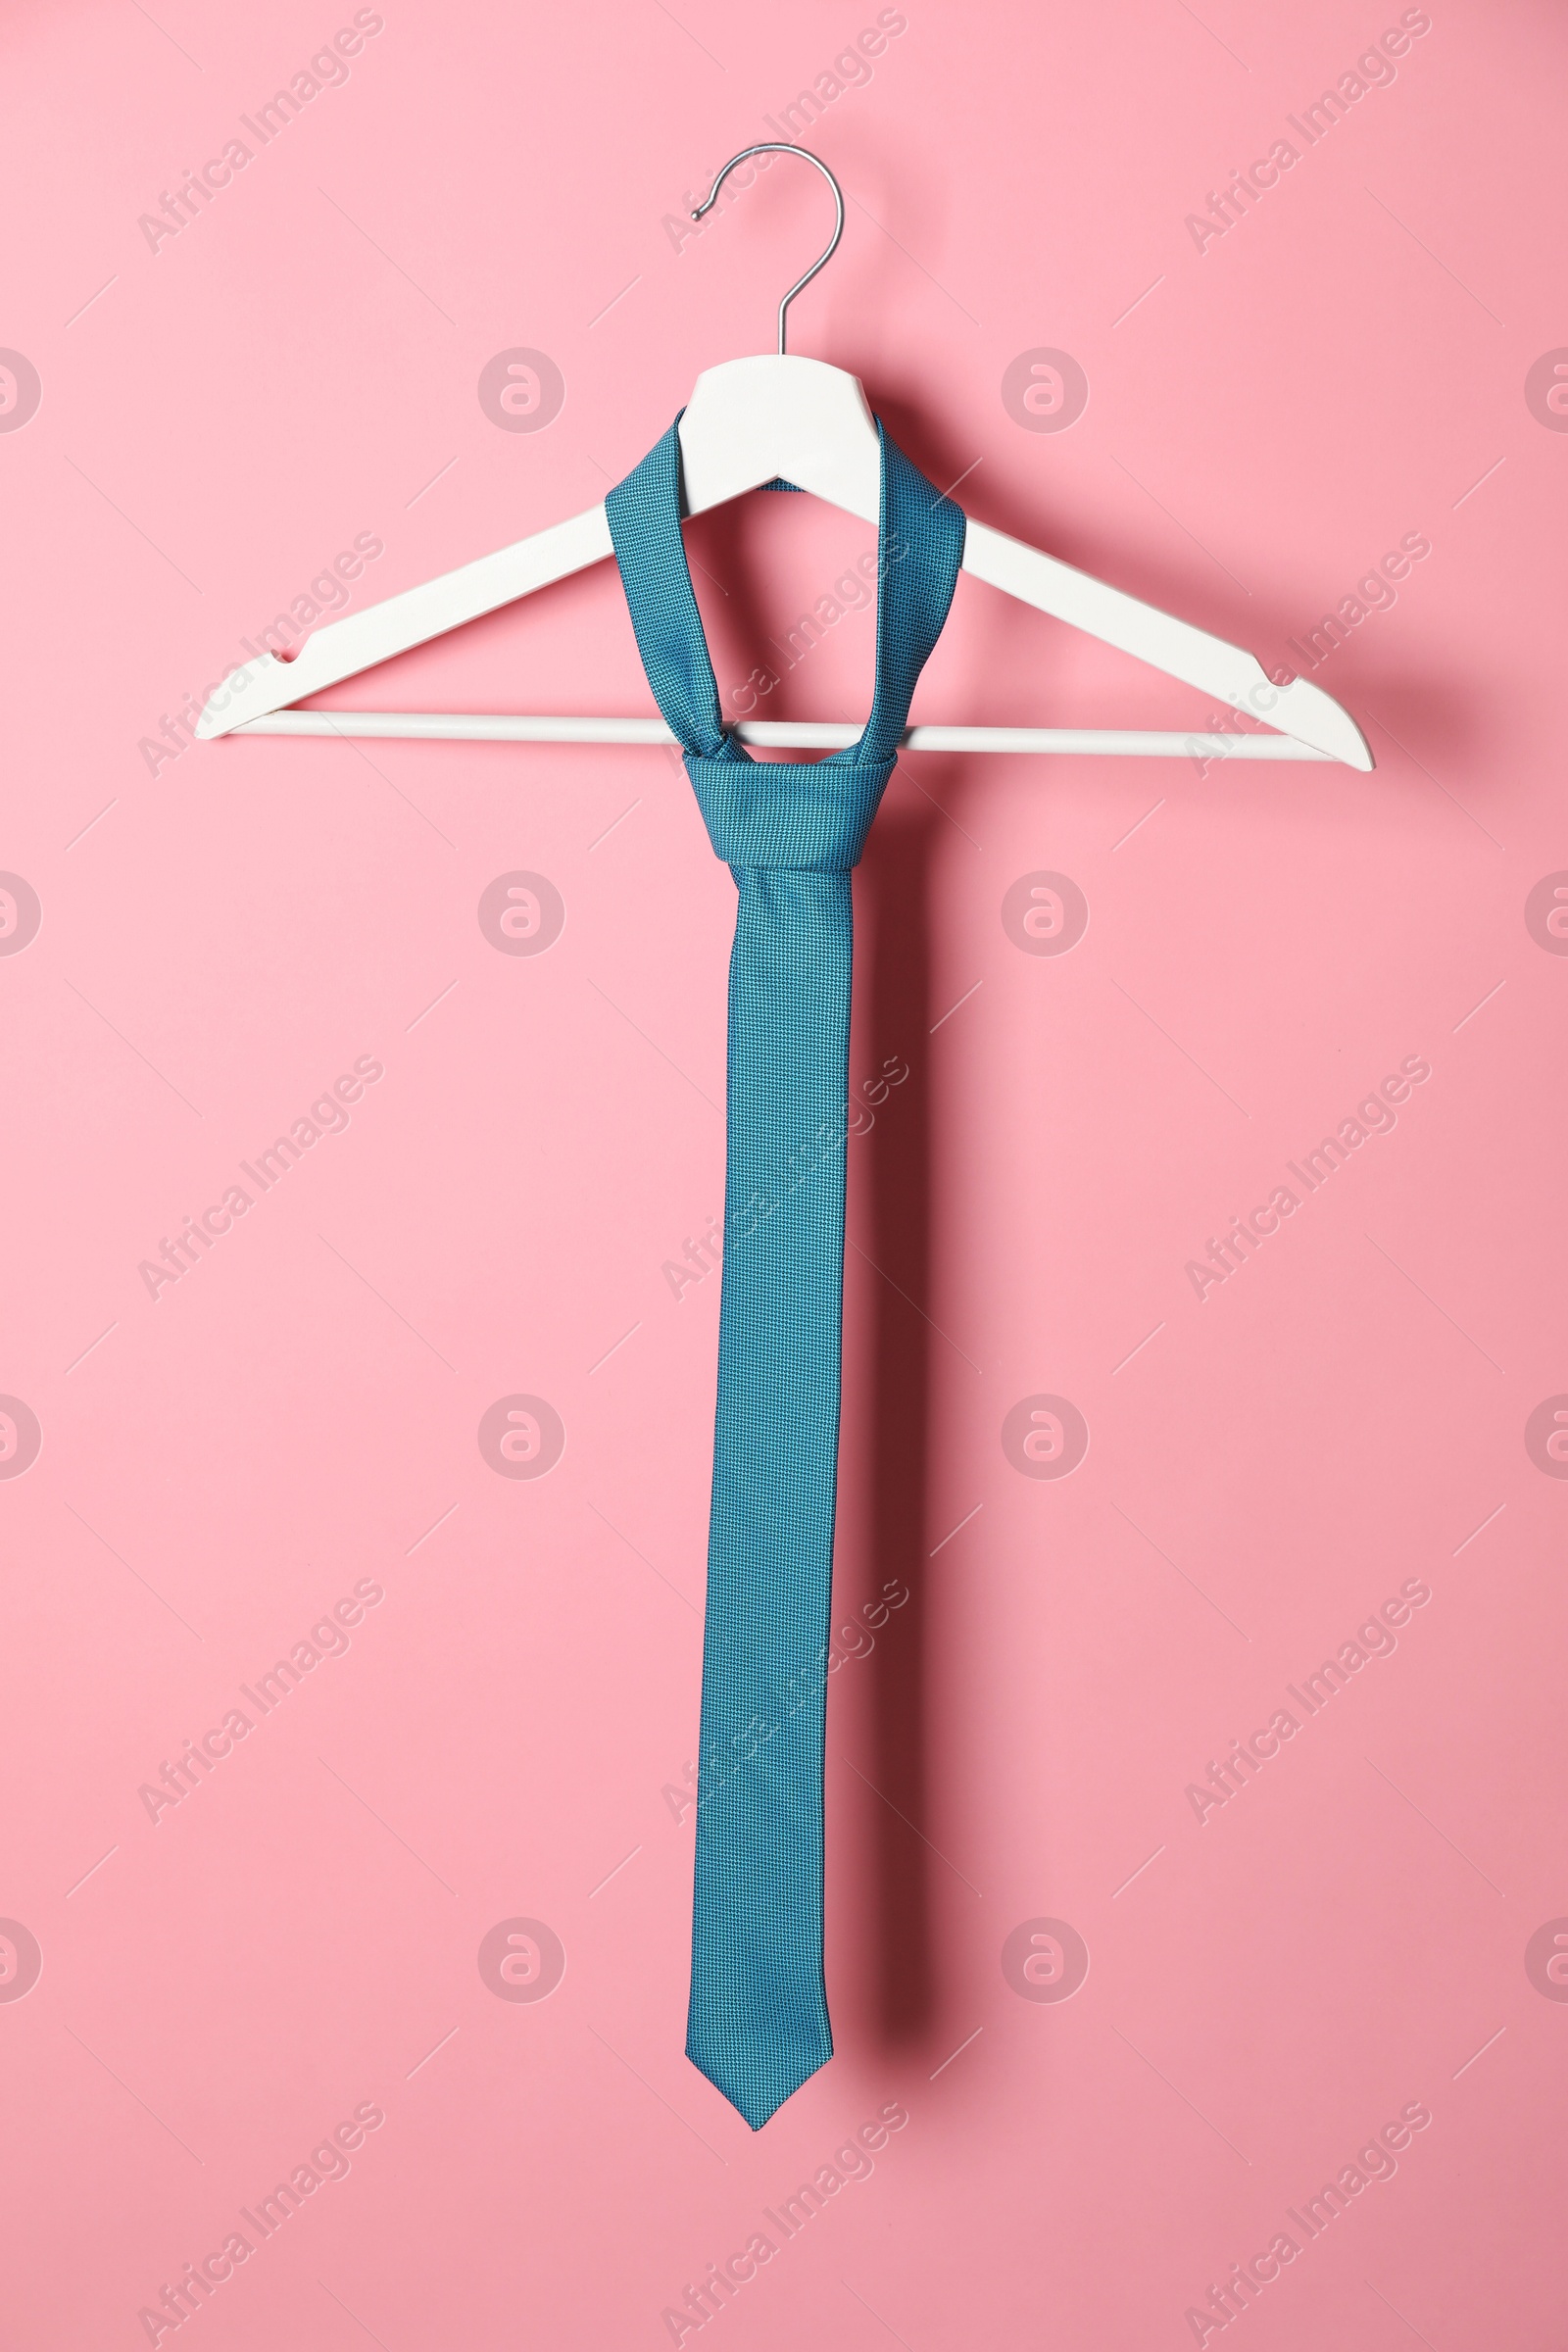 Photo of Hanger with turquoise tie on pink background